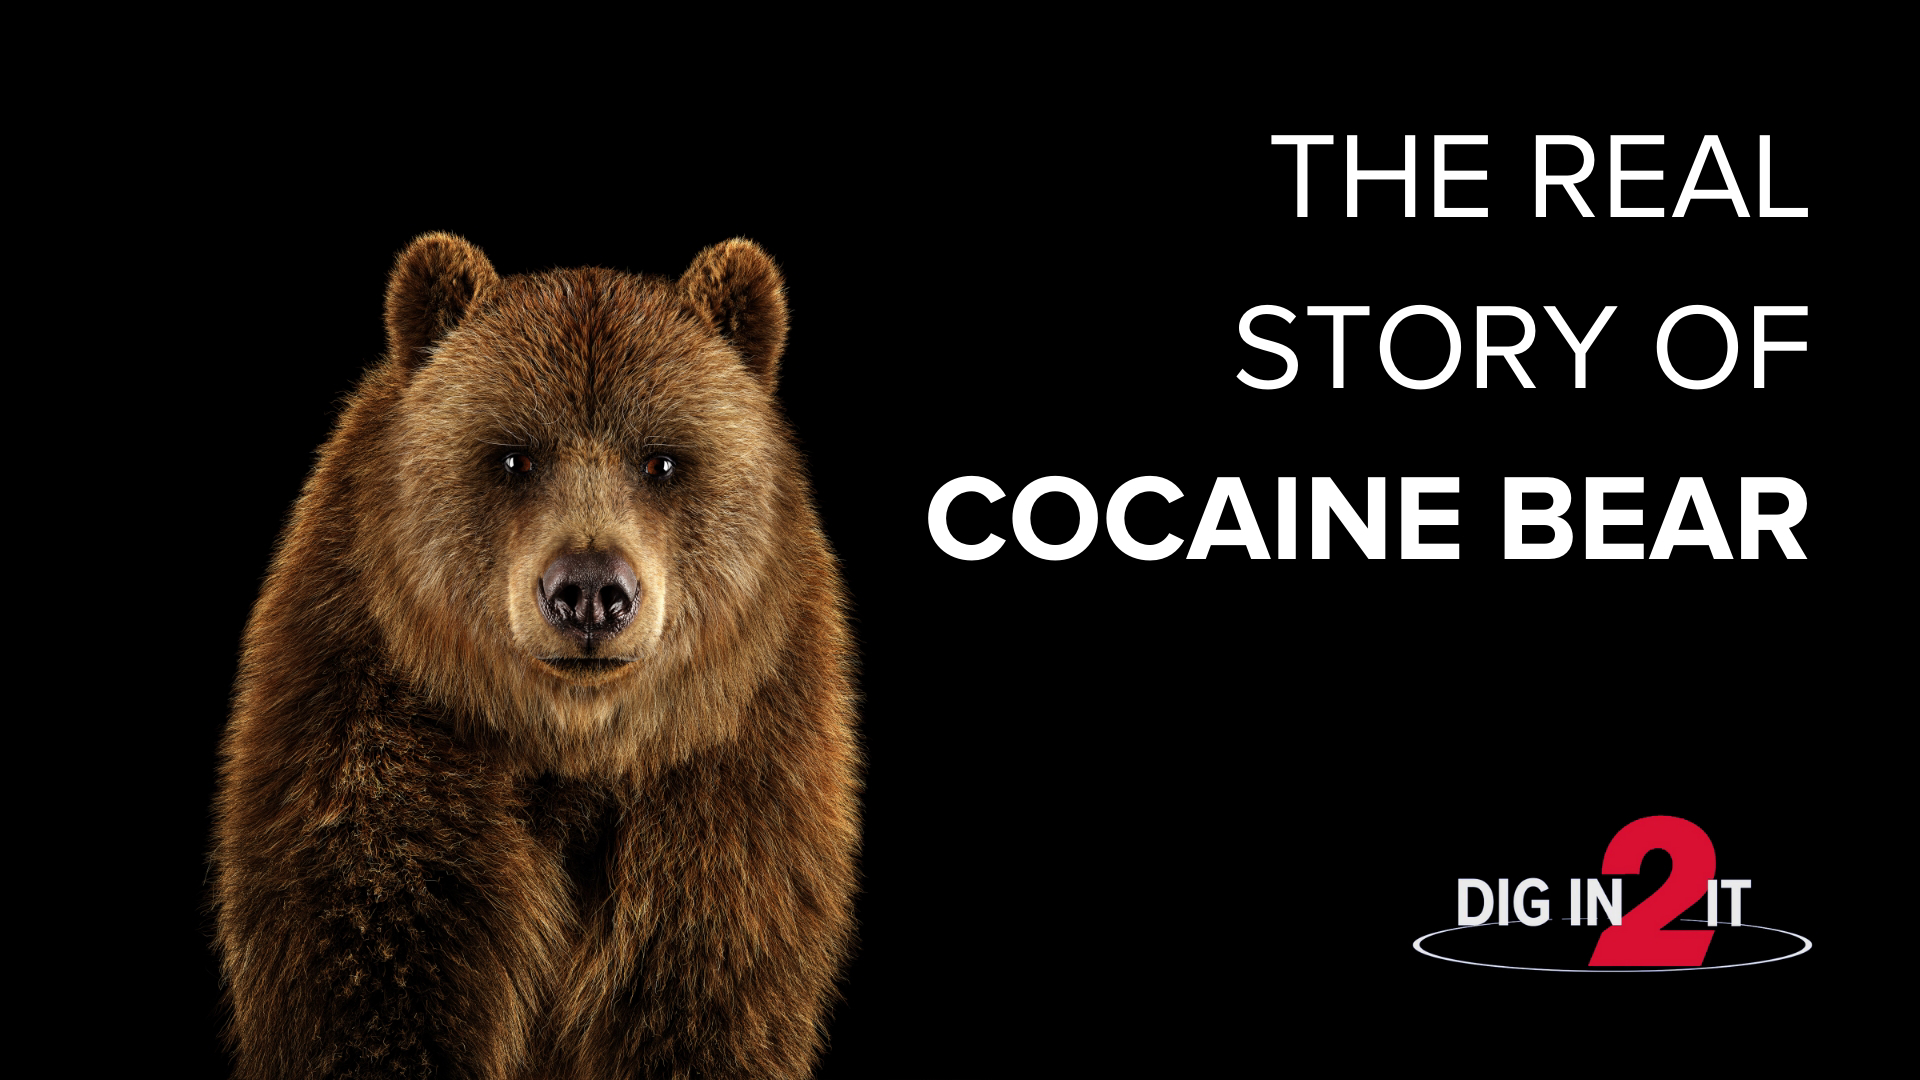 The thriller-dark comedy Cocaine Bear is hitting theaters in February, and there’s some truth behind the story.